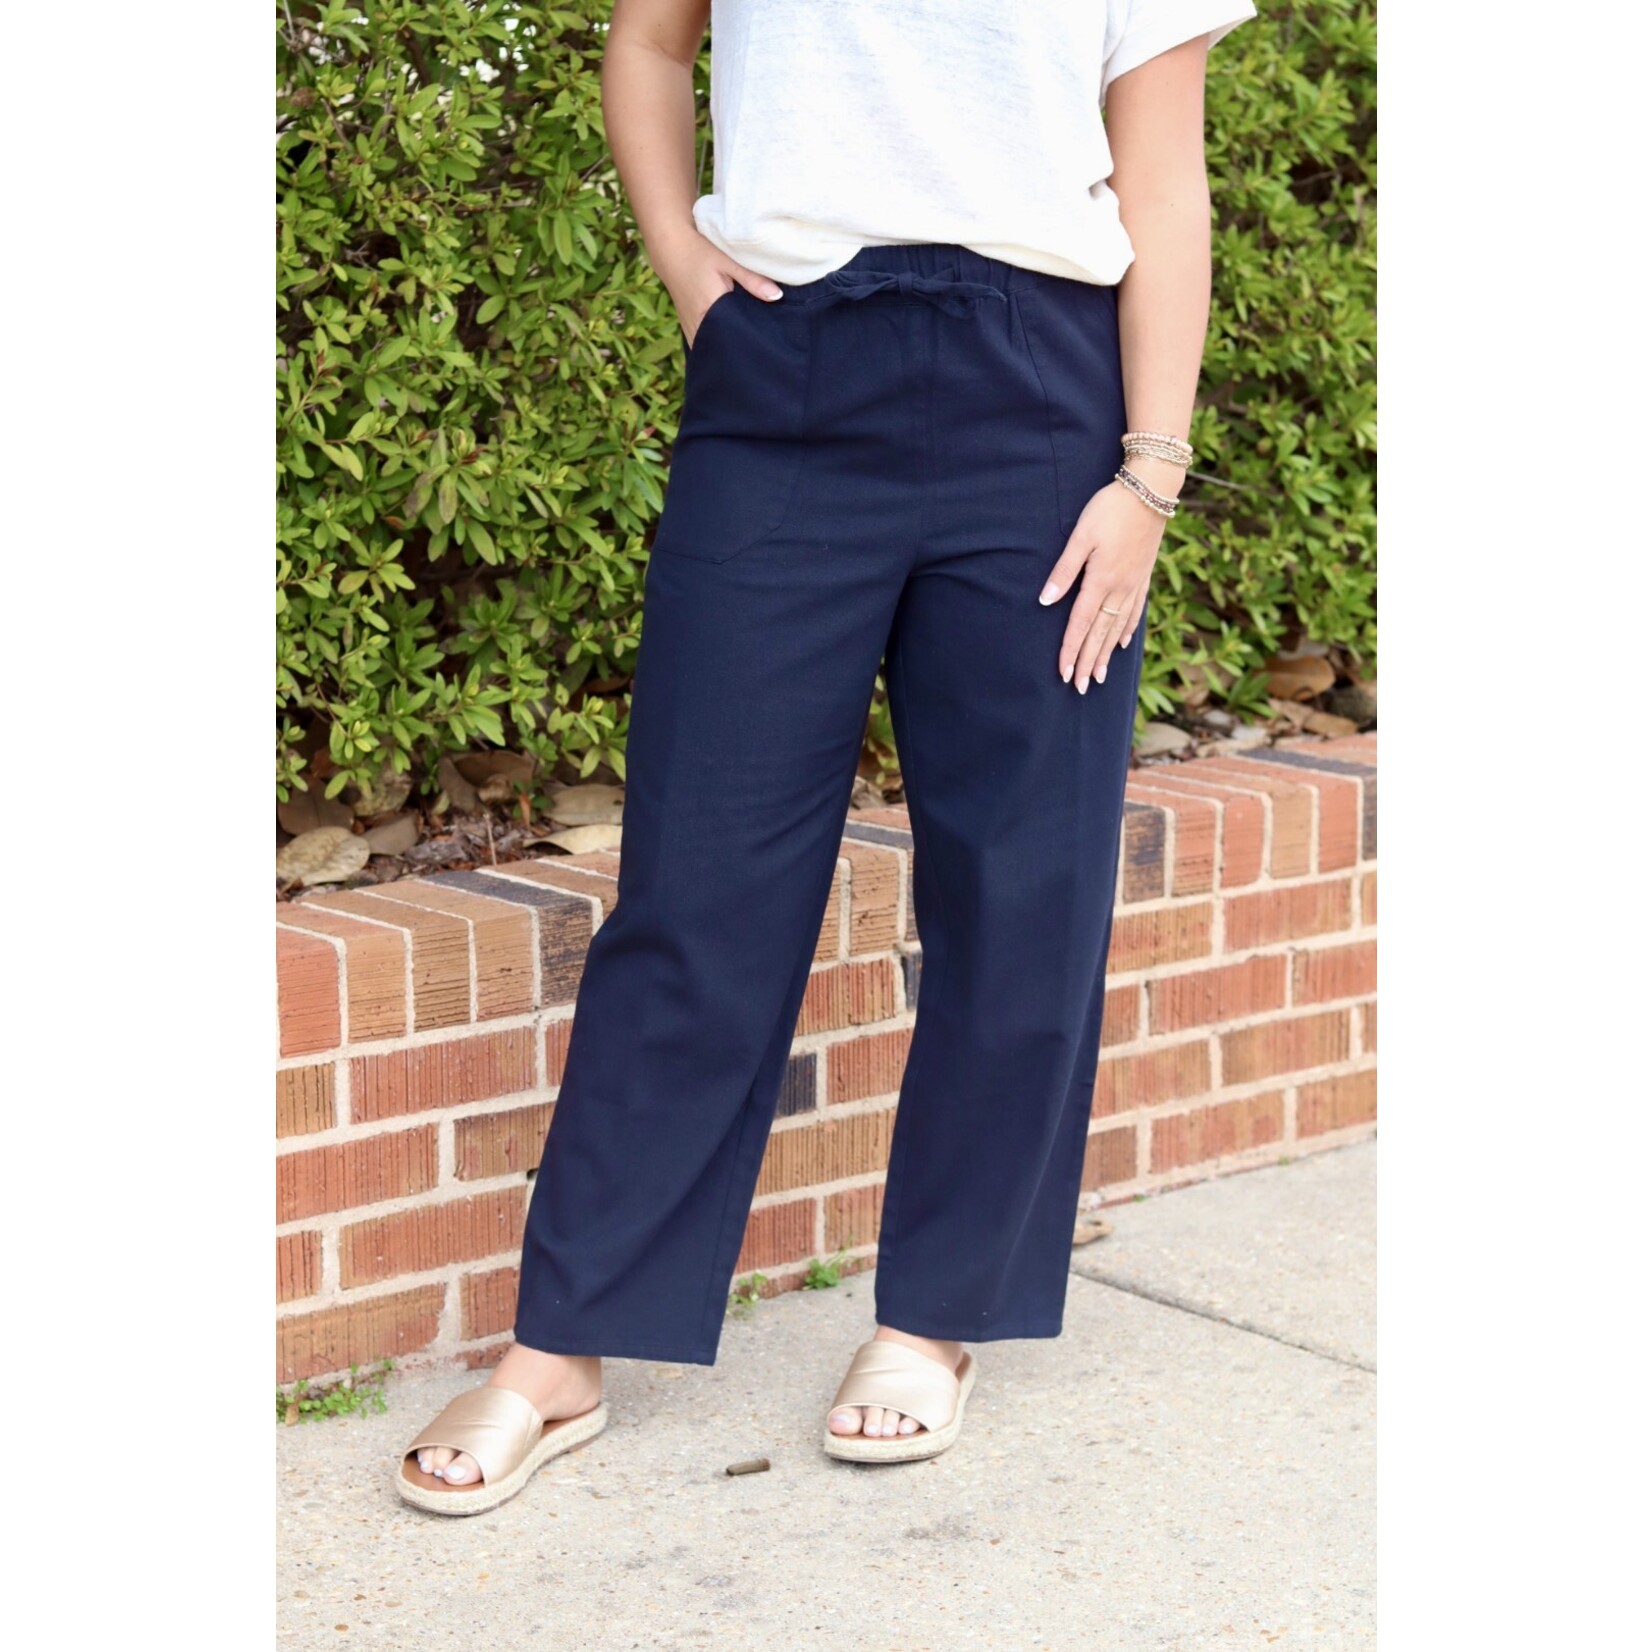 Able Mila Pull On Pant